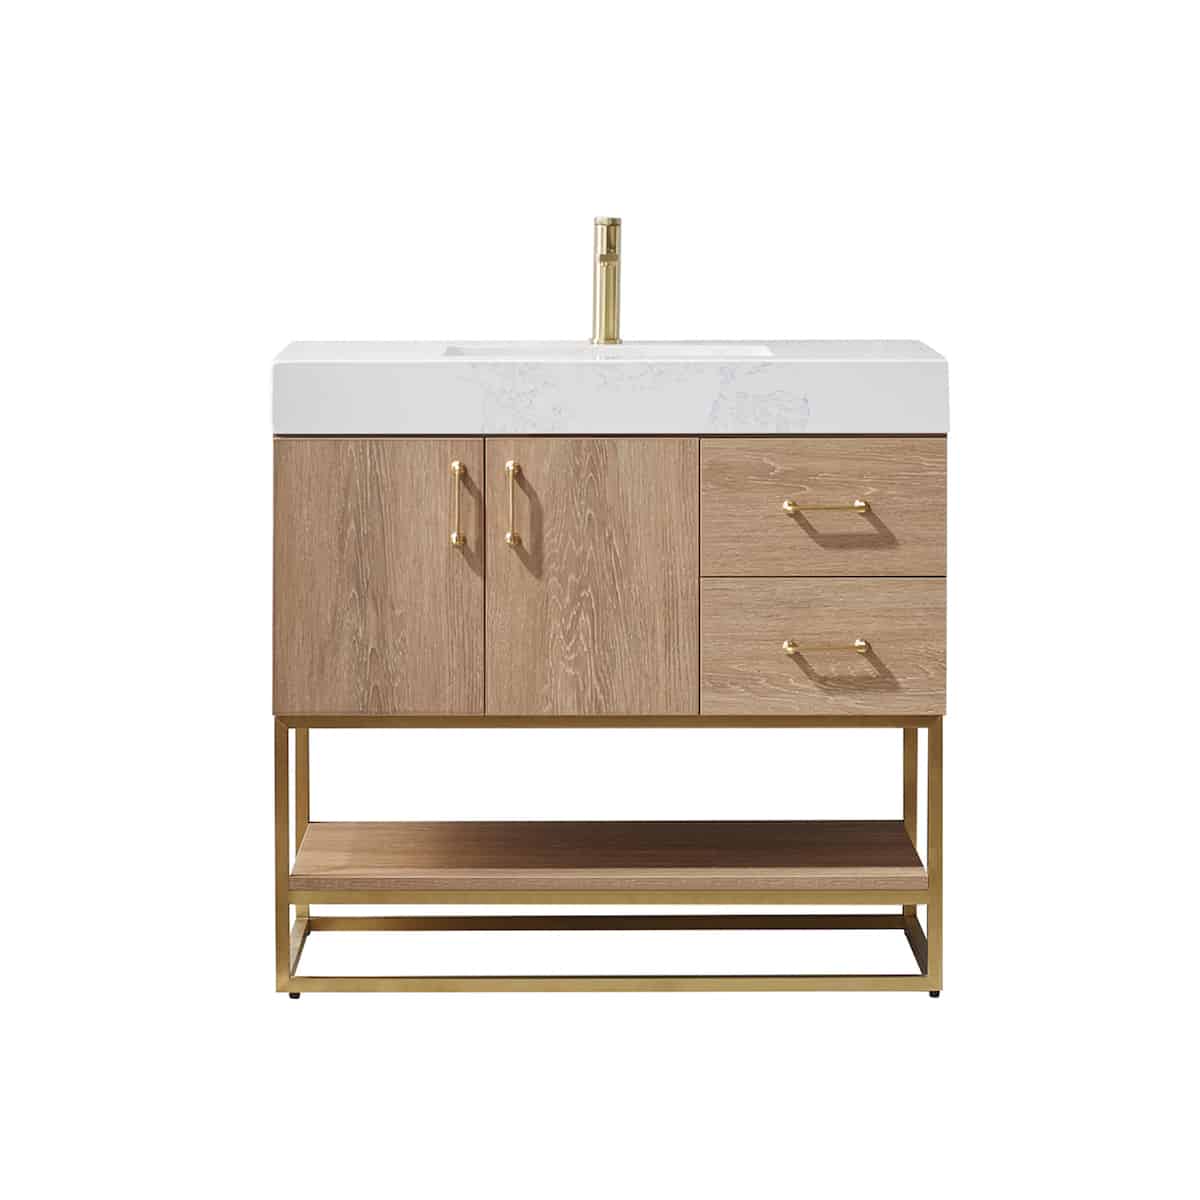 Vinnova Alistair 36 Inch Freestanding Single Vanity in North American Oak and Brushed Gold Frame with White Grain Stone Countertop Without Mirror 789036-NO-GW-NM